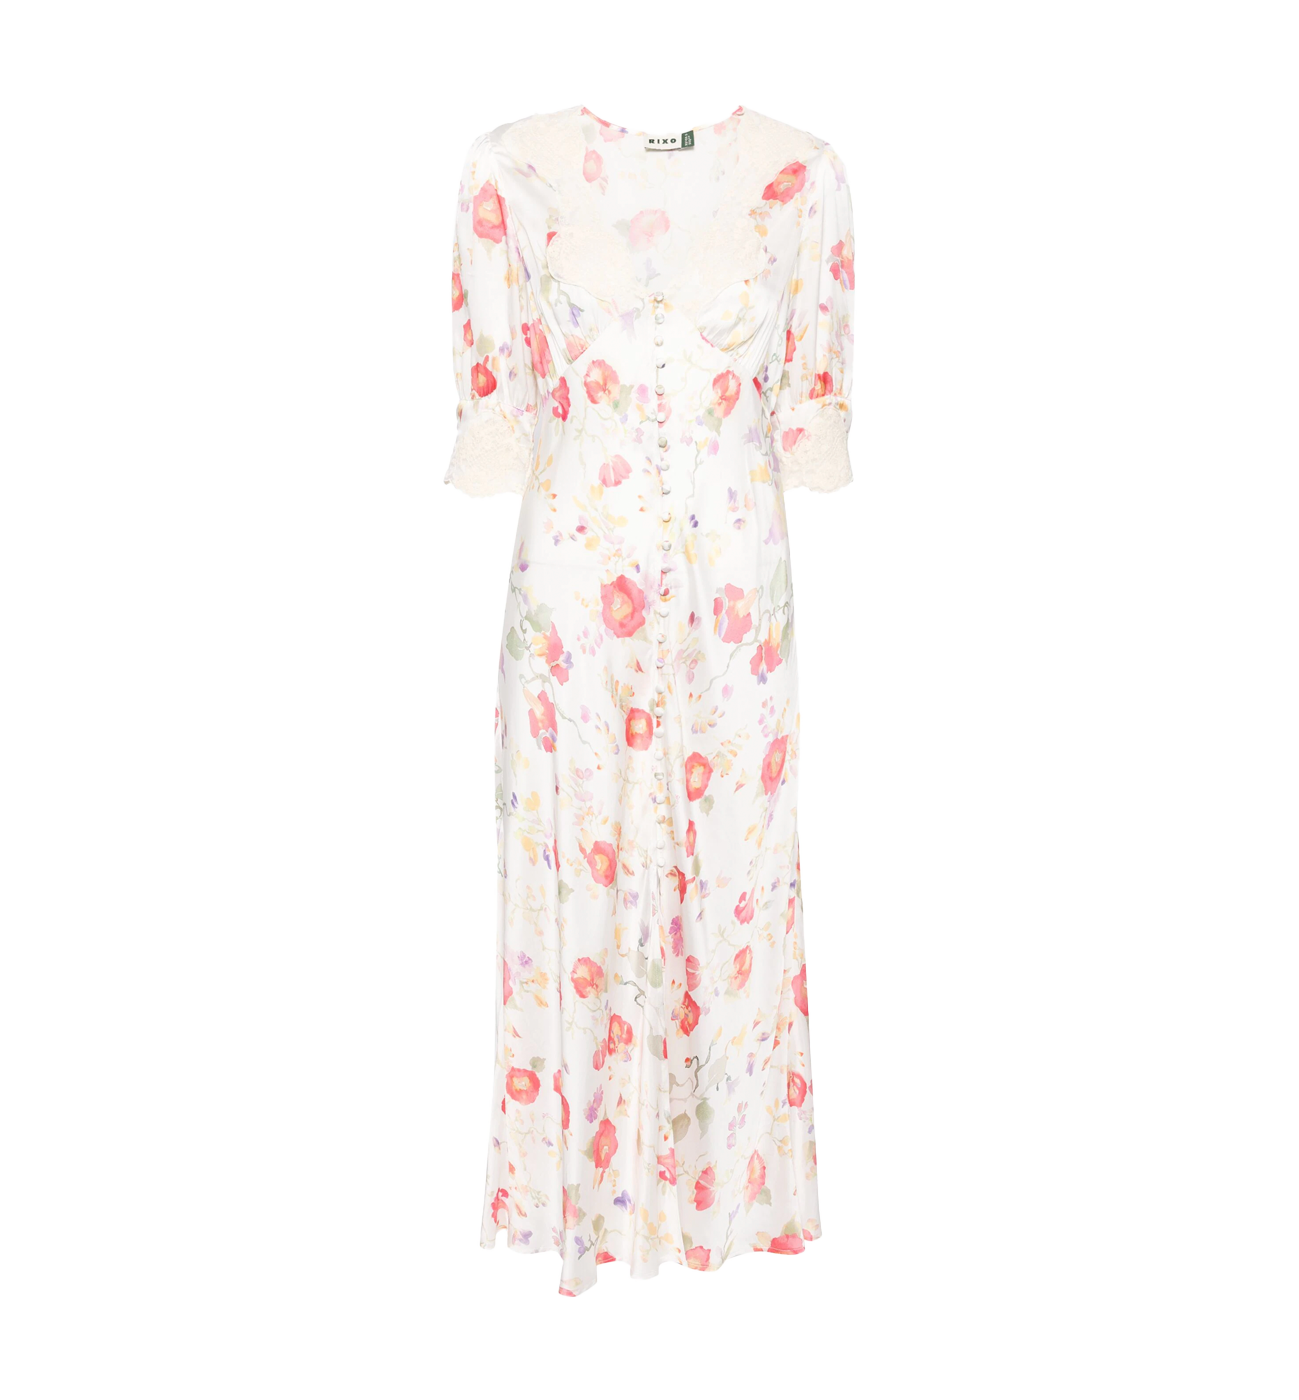 Simone Dress in Water Blossom